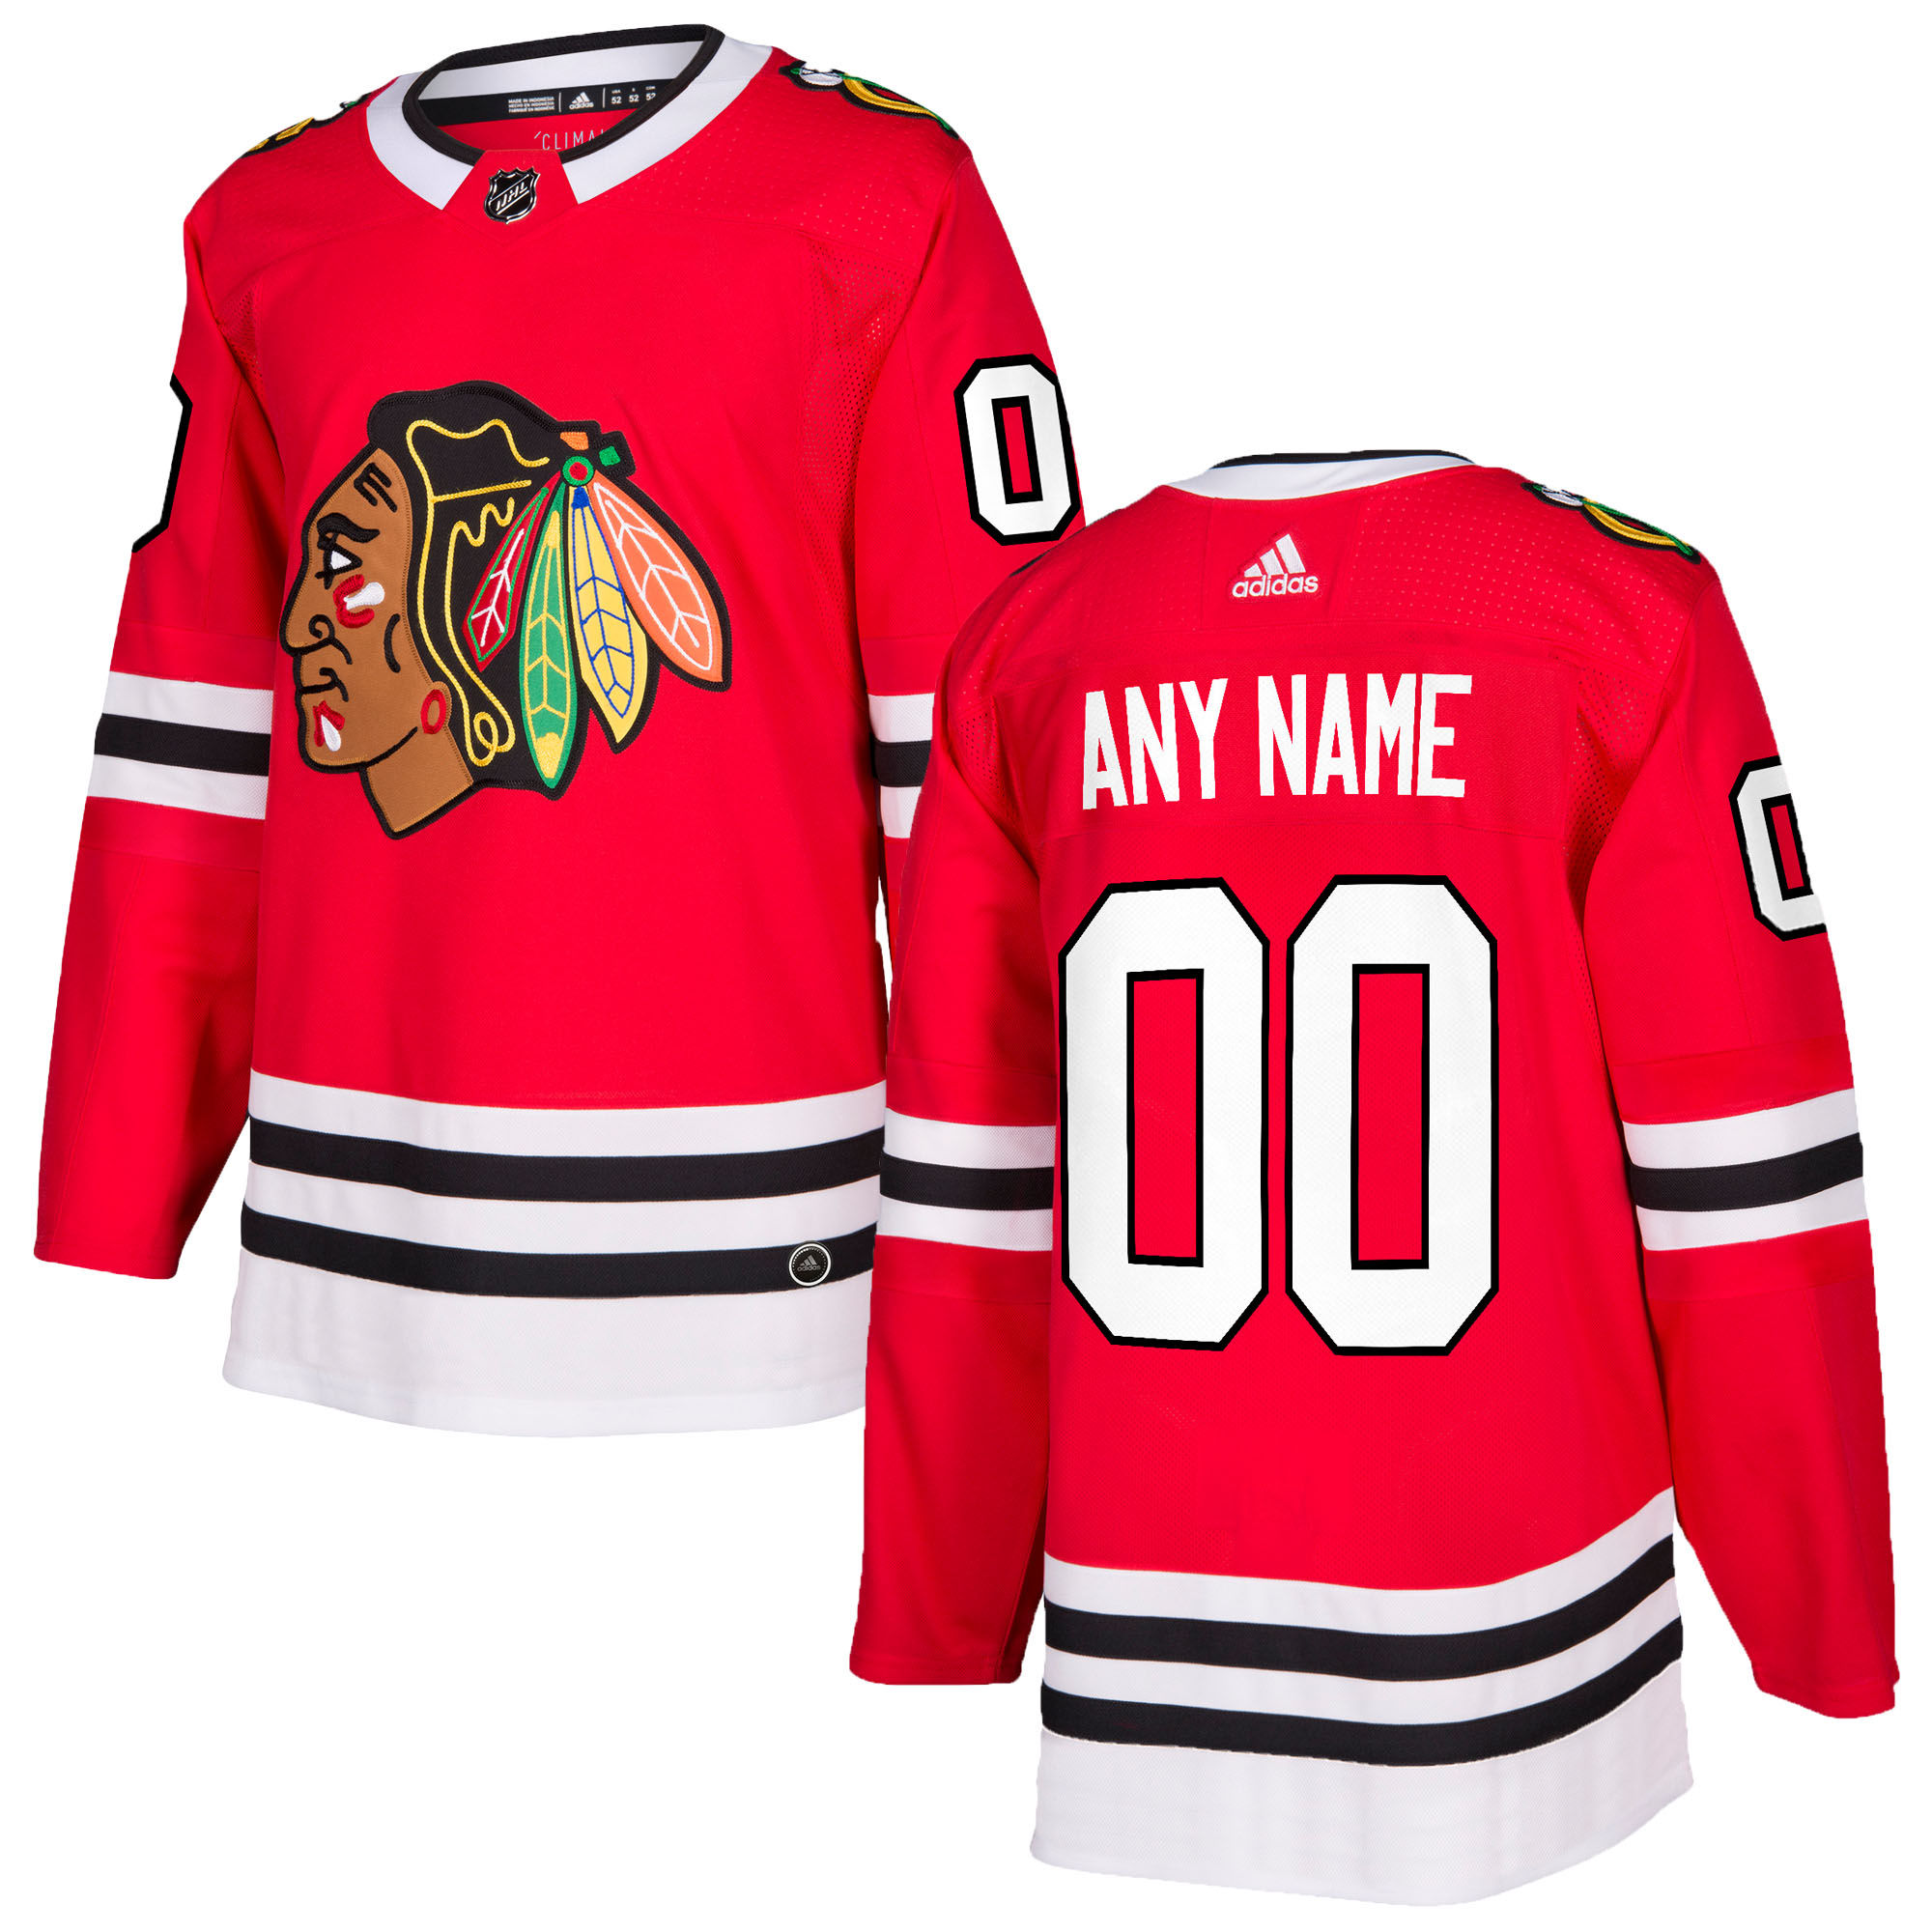 Custom Men's Adidas Chicago Blackhawks Red Home Authentic Stitched NHL Jersey